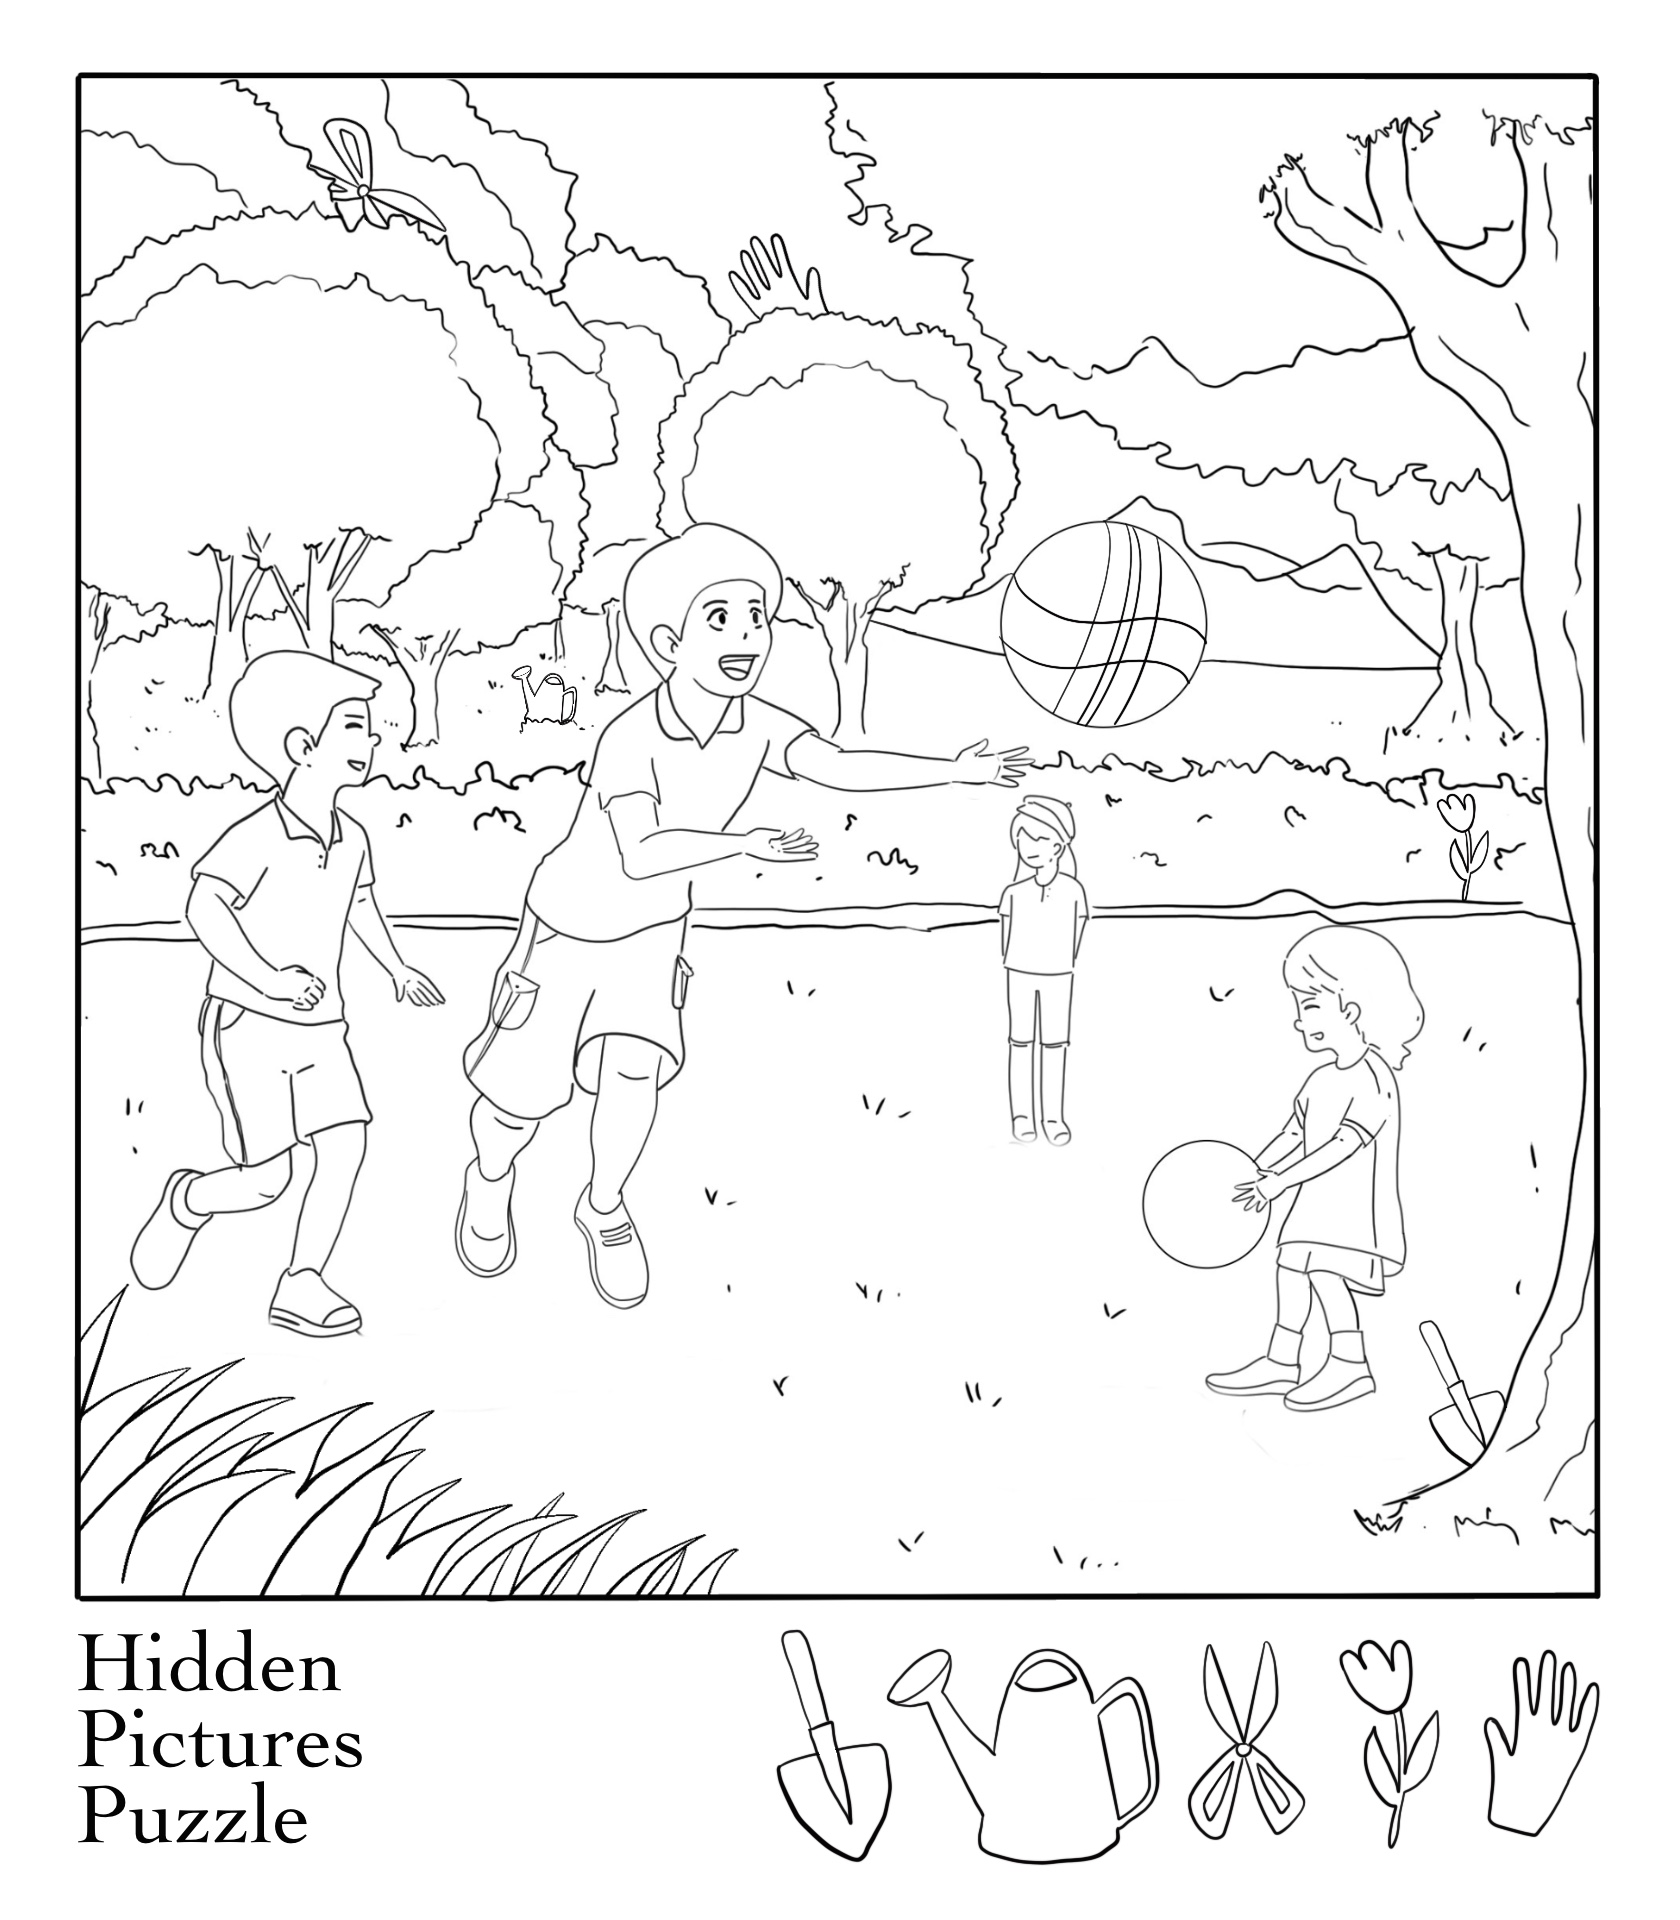 Printable Kids Hidden Object Puzzles